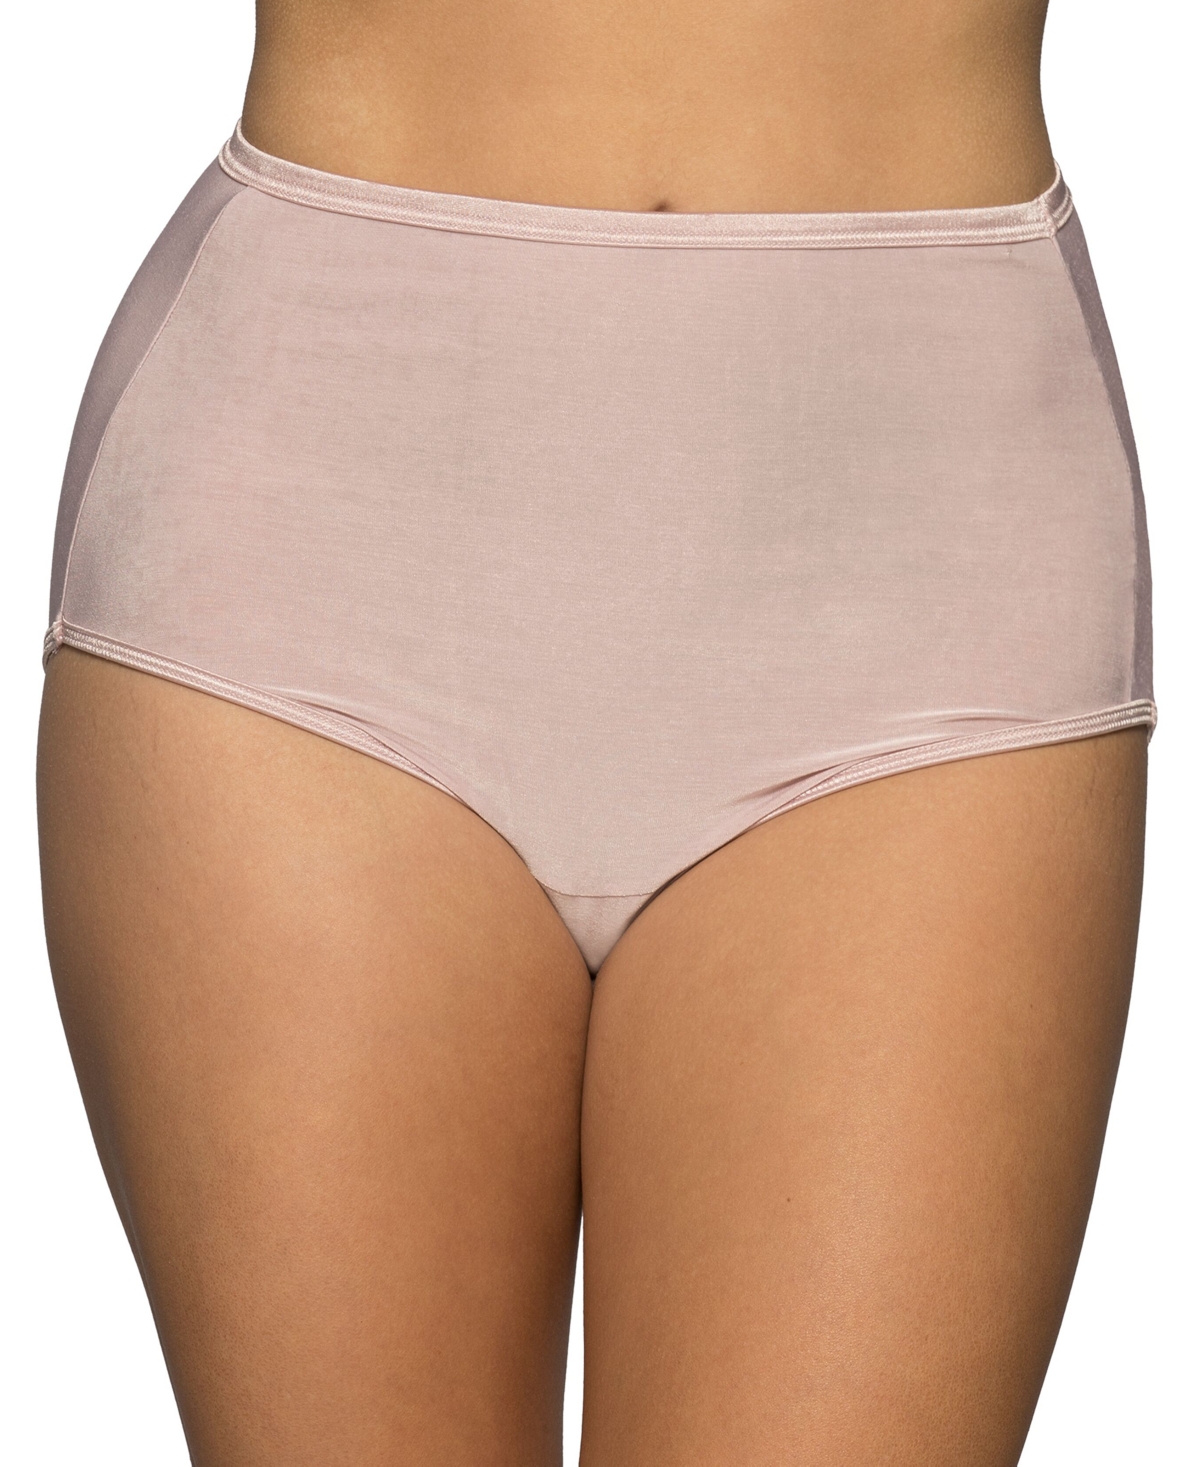 VANITY FAIR ILLUMINATION BRIEF UNDERWEAR 13109, ALSO AVAILABLE IN EXTENDED SIZES